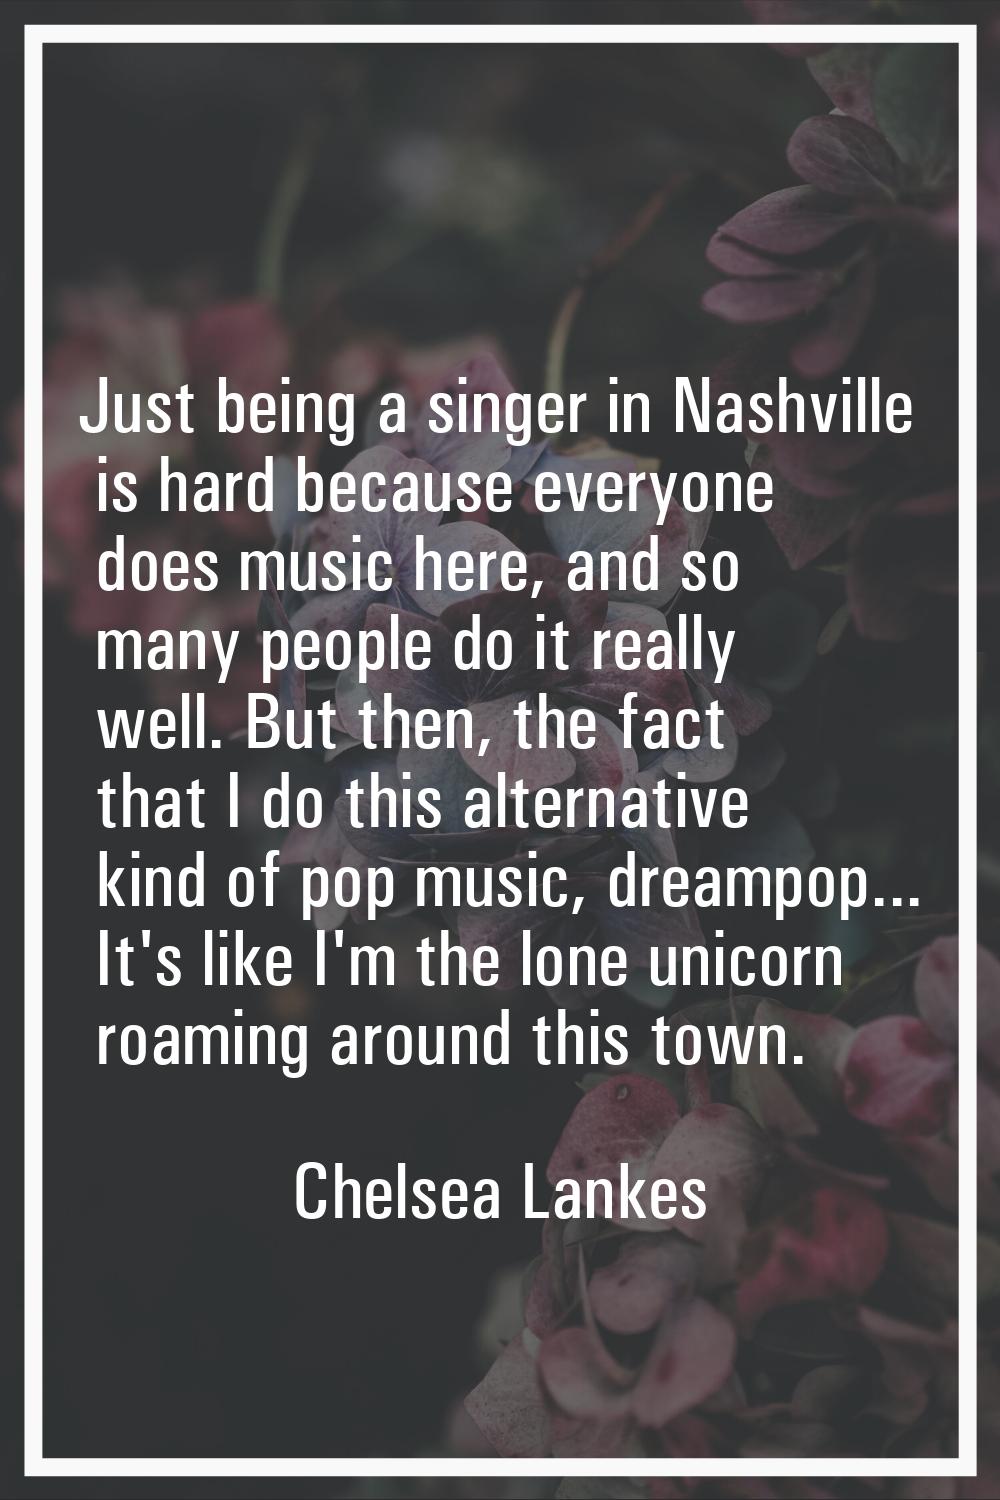 Just being a singer in Nashville is hard because everyone does music here, and so many people do it